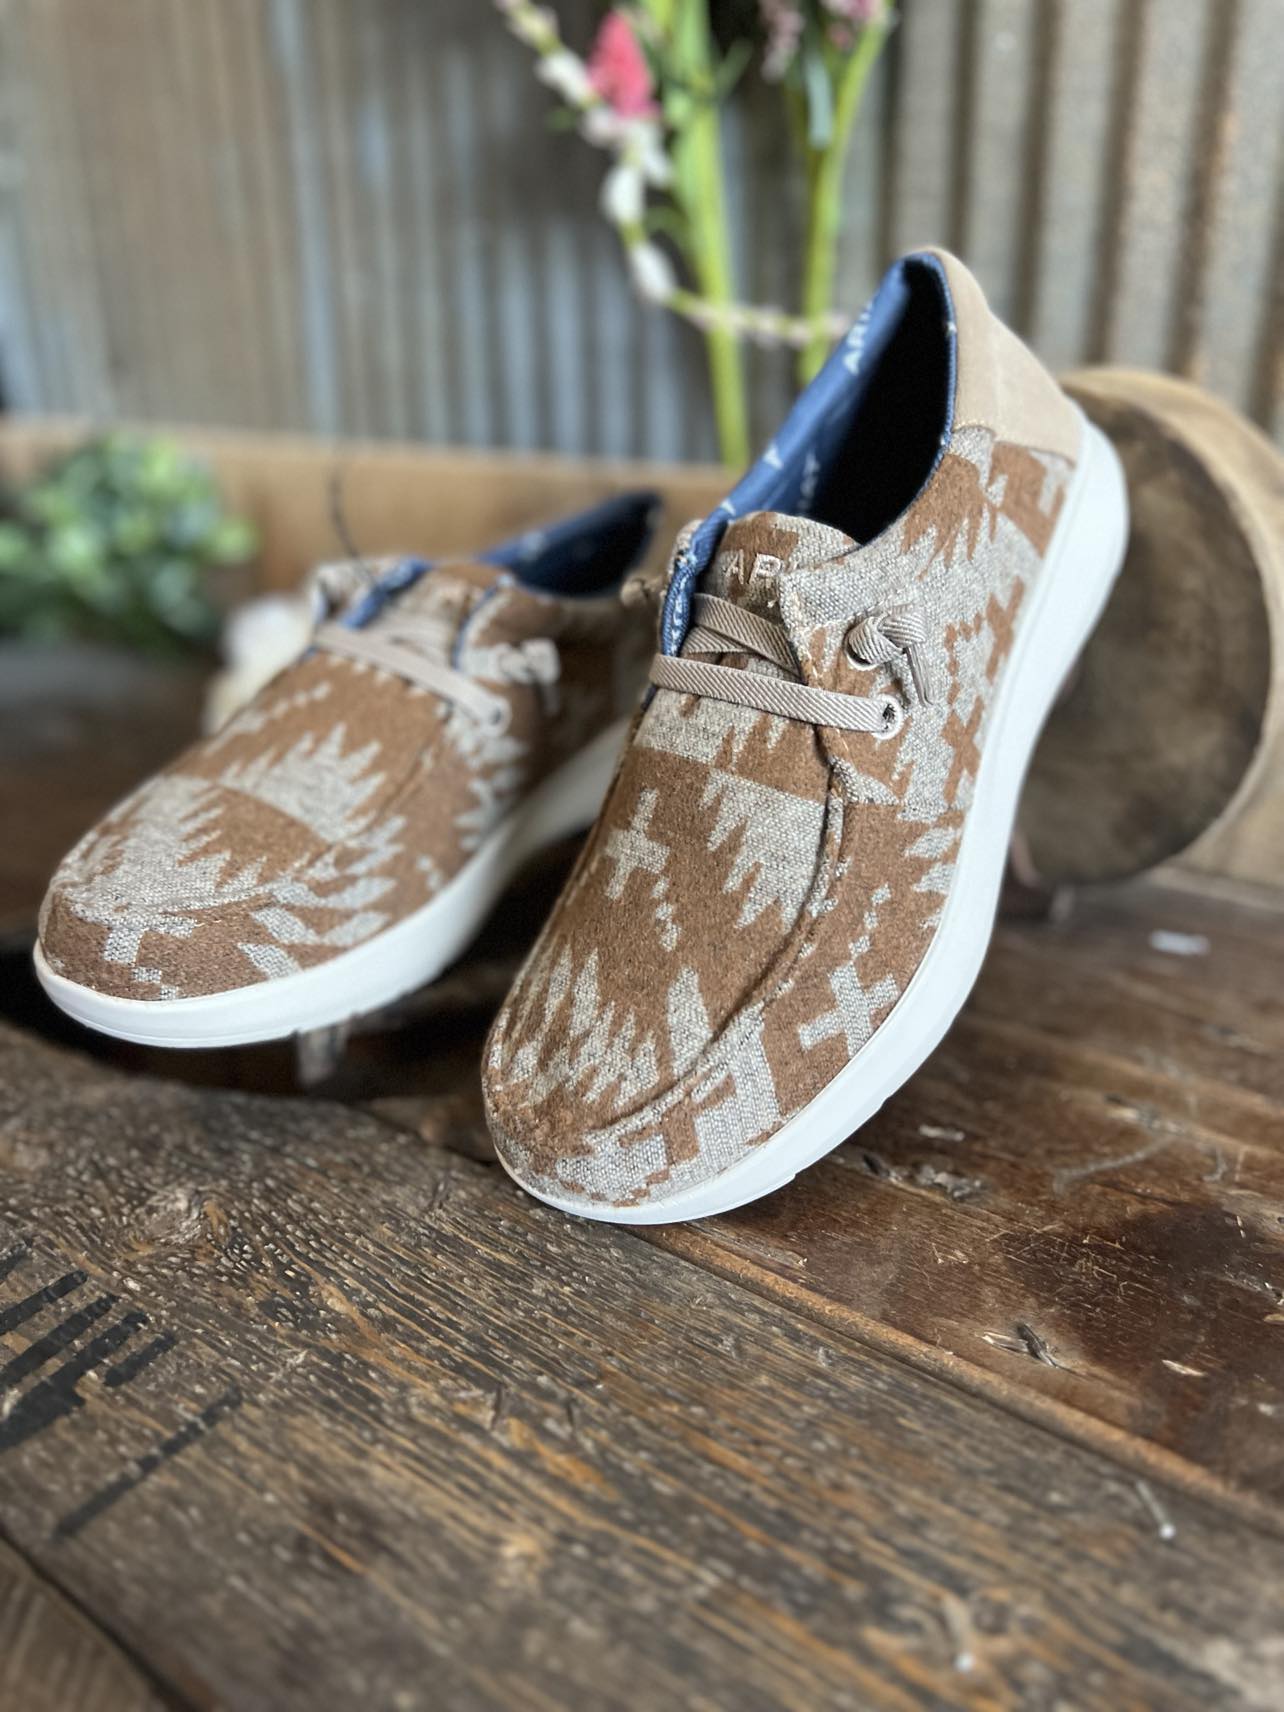 Men's Ariat Hilo Stretch Lace Sneakers in Wooly Tan Aztec-Men's Casual Shoes-Ariat-Lucky J Boots & More, Women's, Men's, & Kids Western Store Located in Carthage, MO